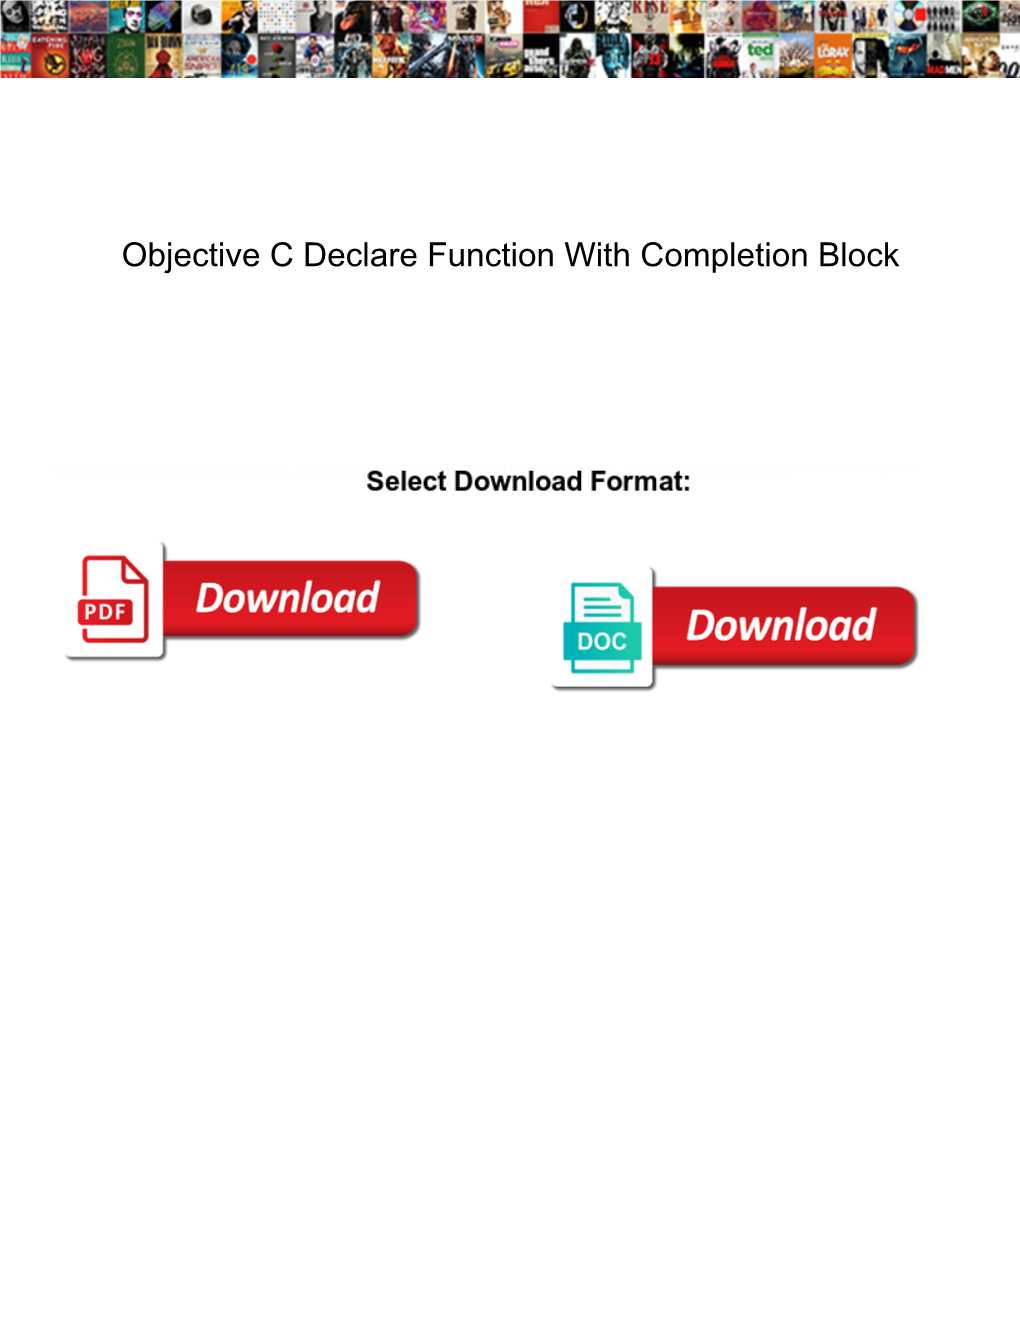 Objective C Declare Function with Completion Block